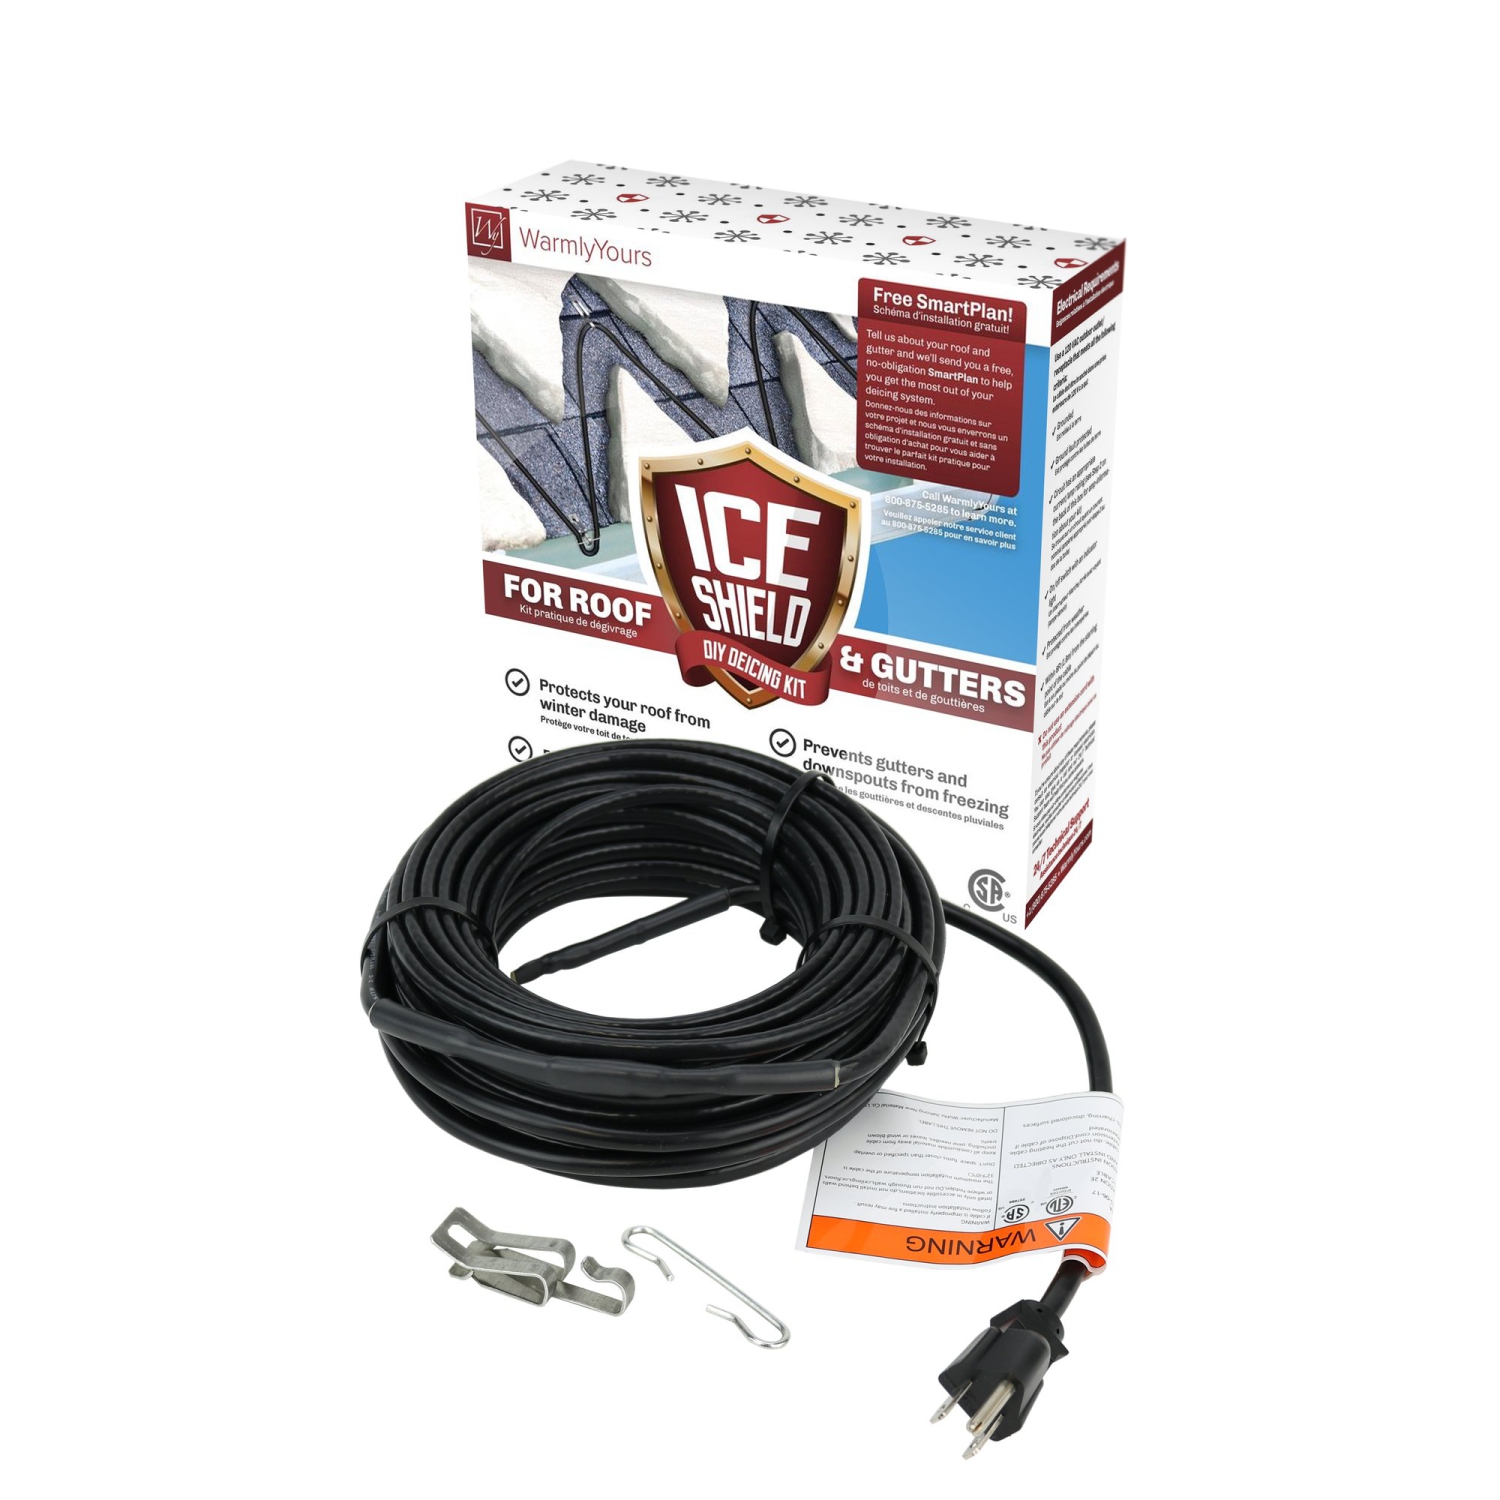 WarmlyYours Ice Shield Roof & Gutter De-icing Cable Kit, 200 ft, Protect from Ice and Snow Damage